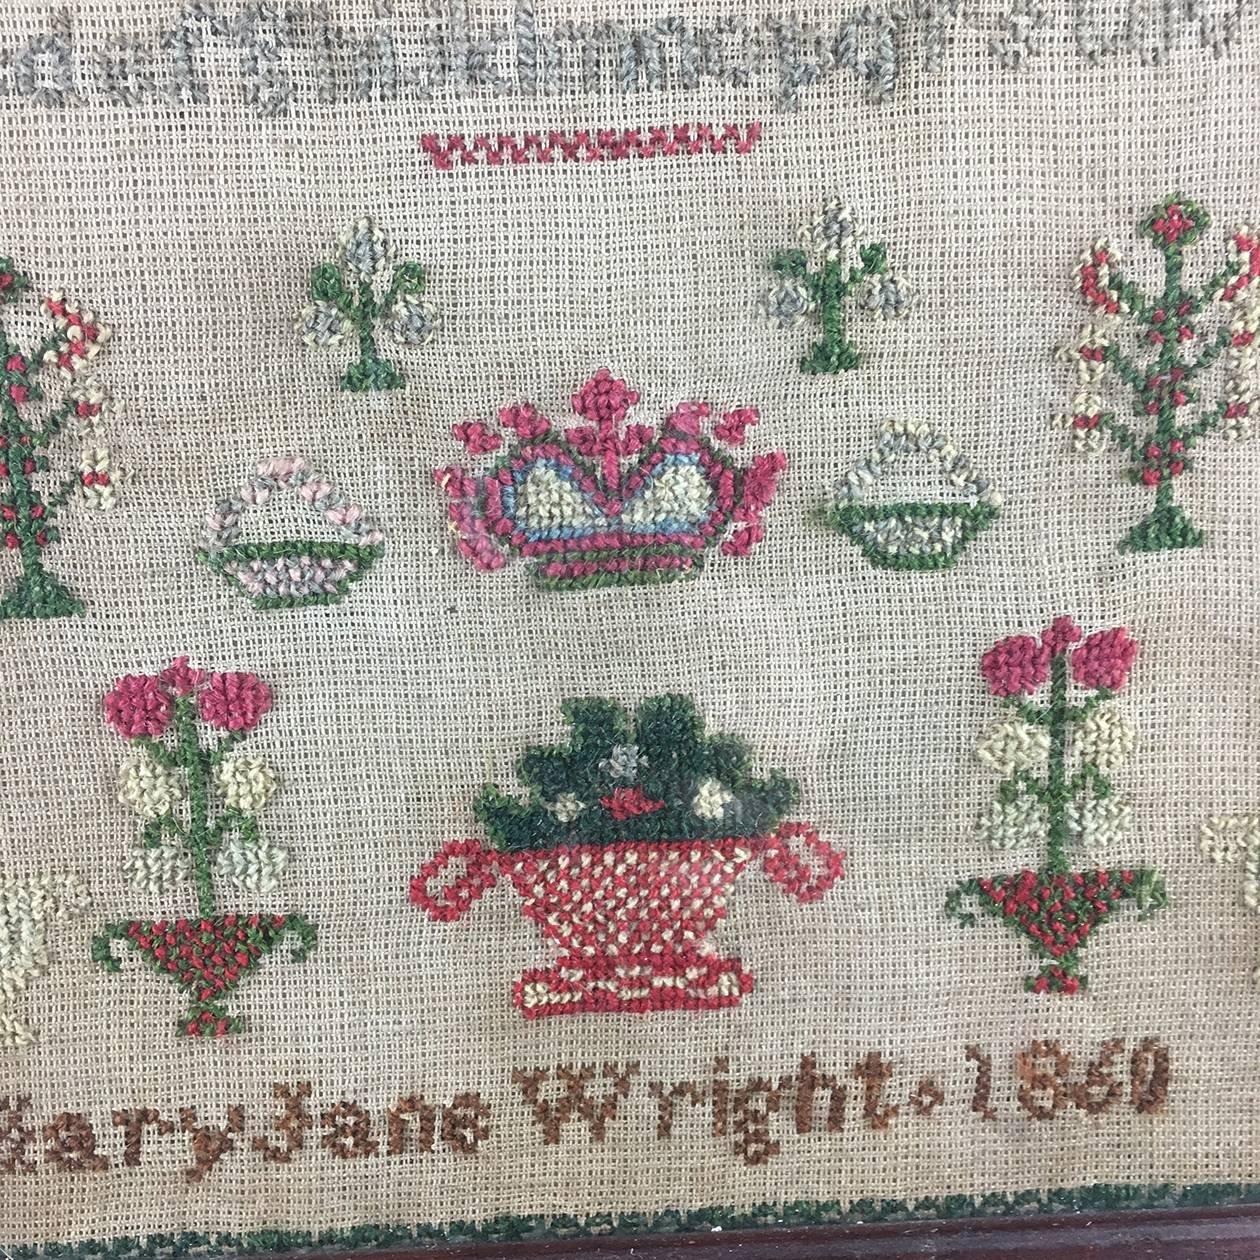 American Mid-Victorian Folk Art children's sampler dated 1860

The nearly square sampler with a full alphabet both in capitals and lowercase, numbers 1-9, multiple baskets of flowers, flowers, and a crown to the center. 

Signed to the lower